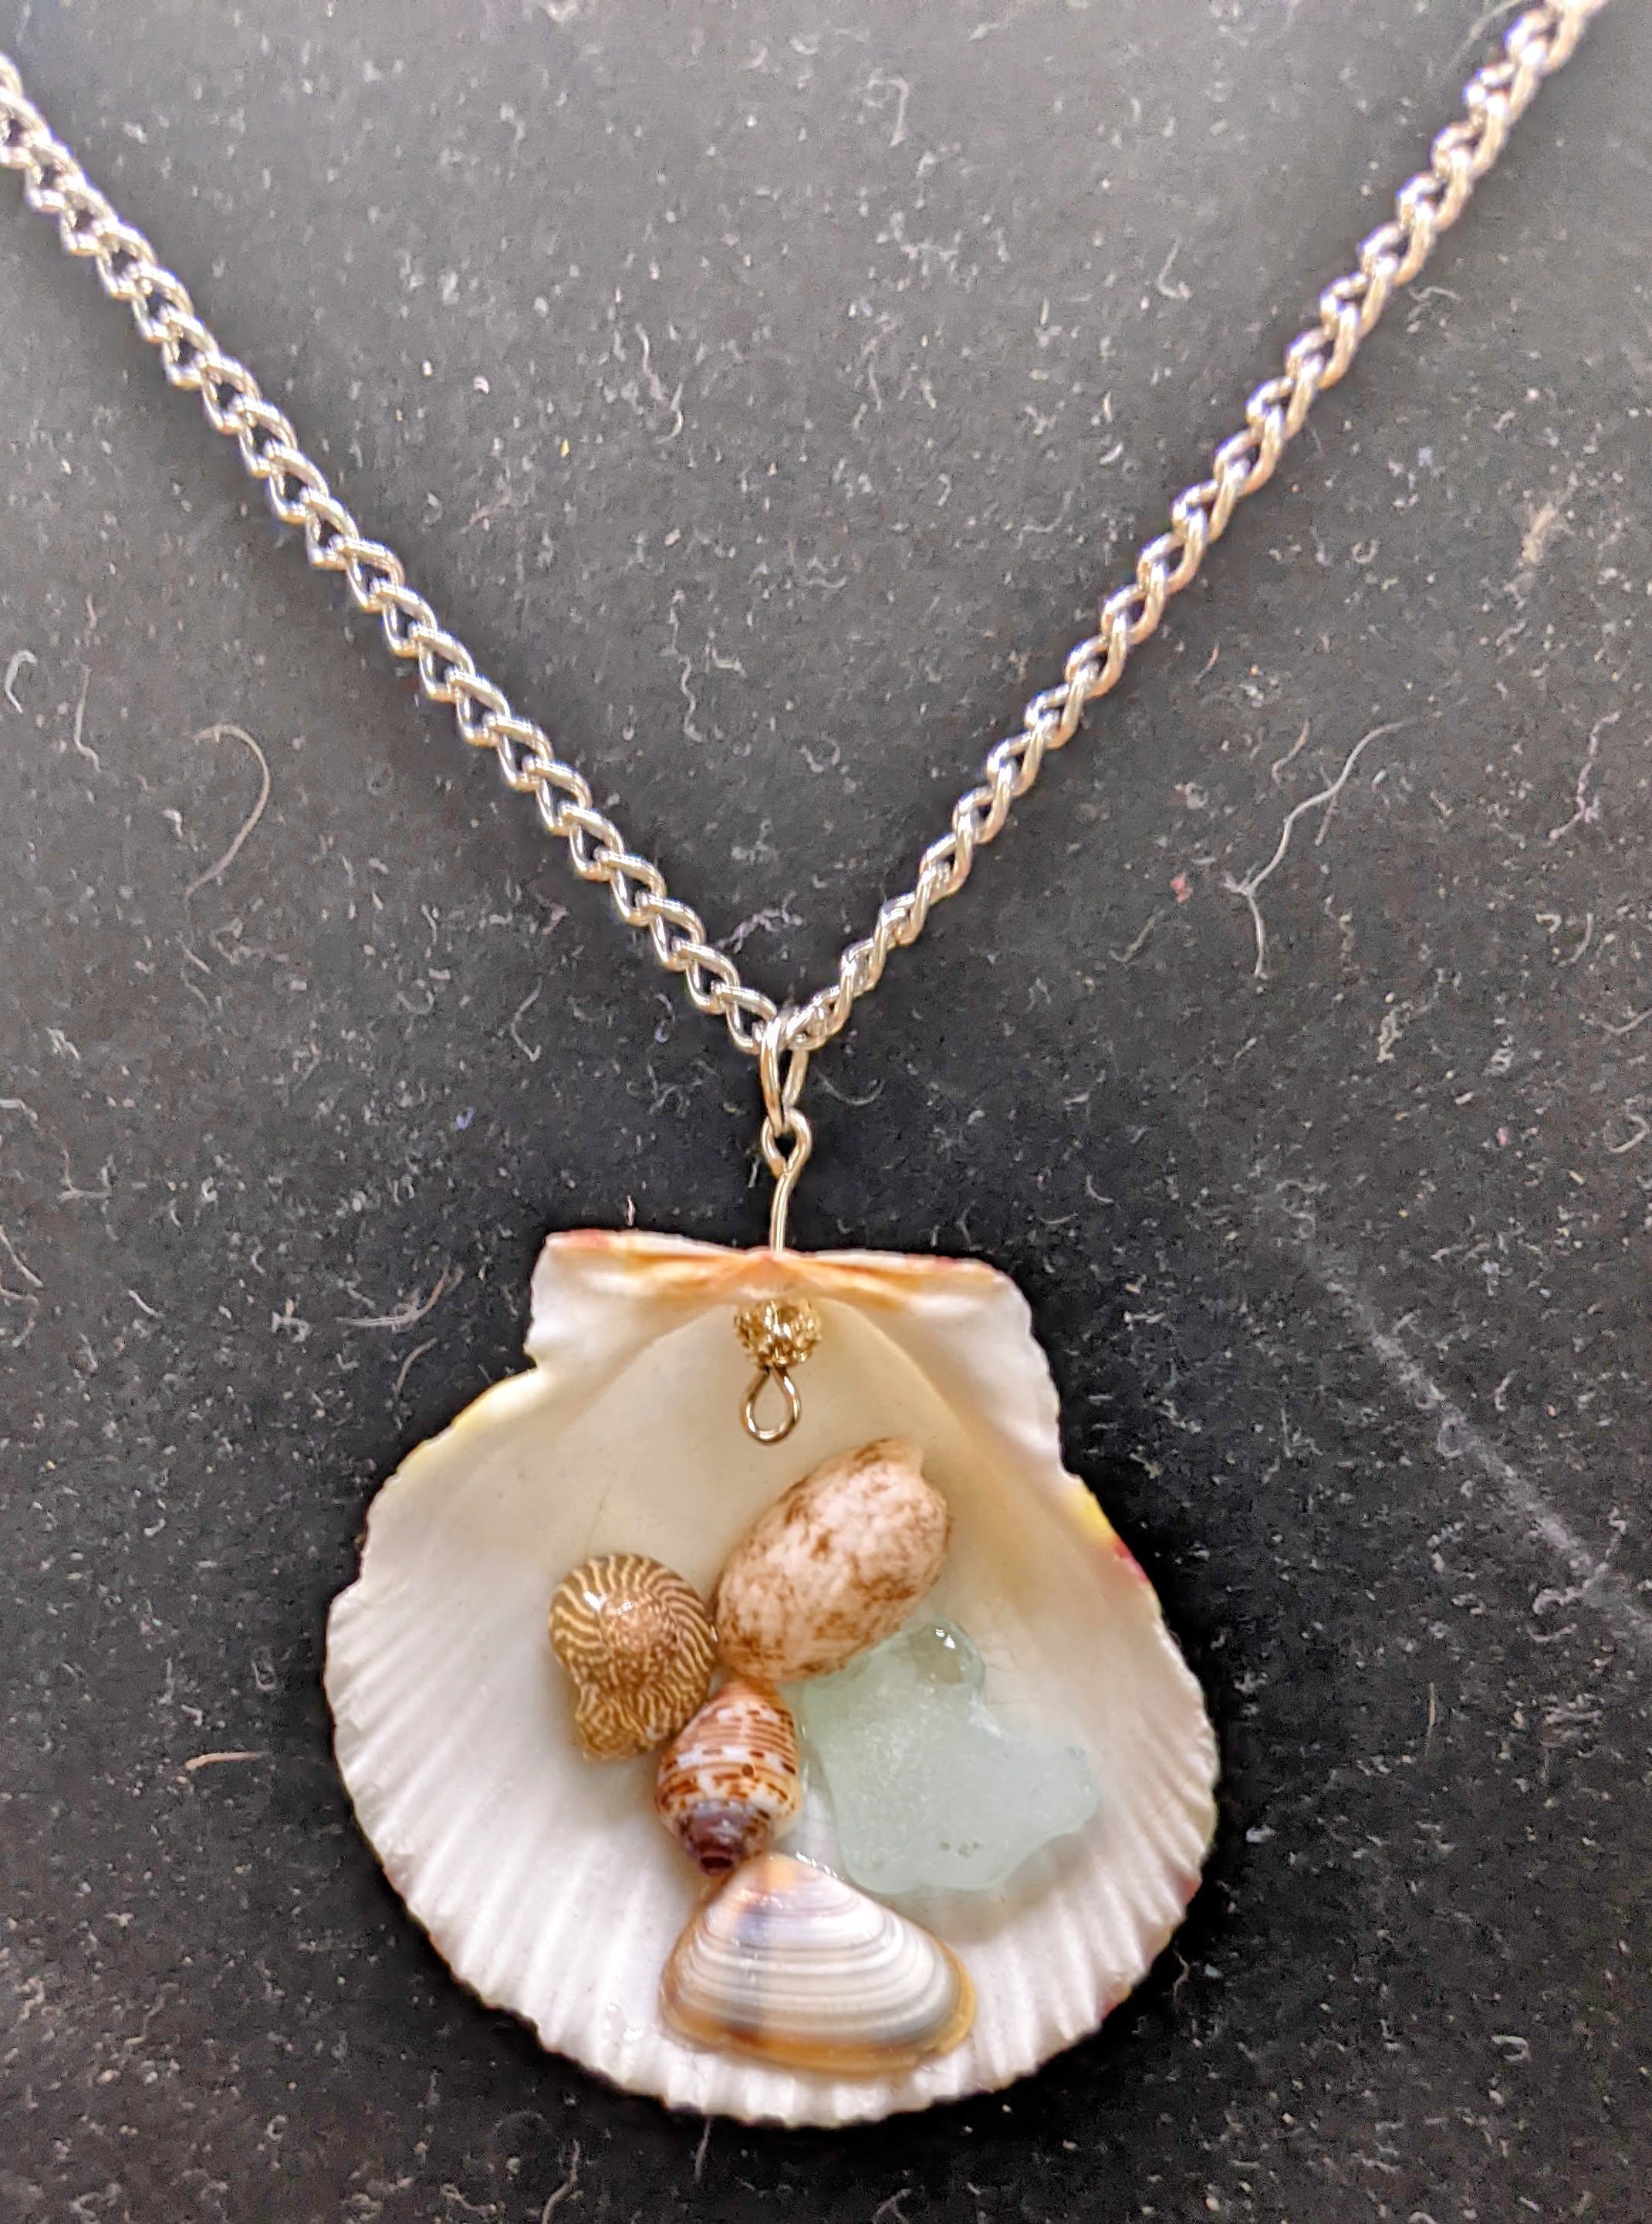 Calico scallop shell and seaglass necklace